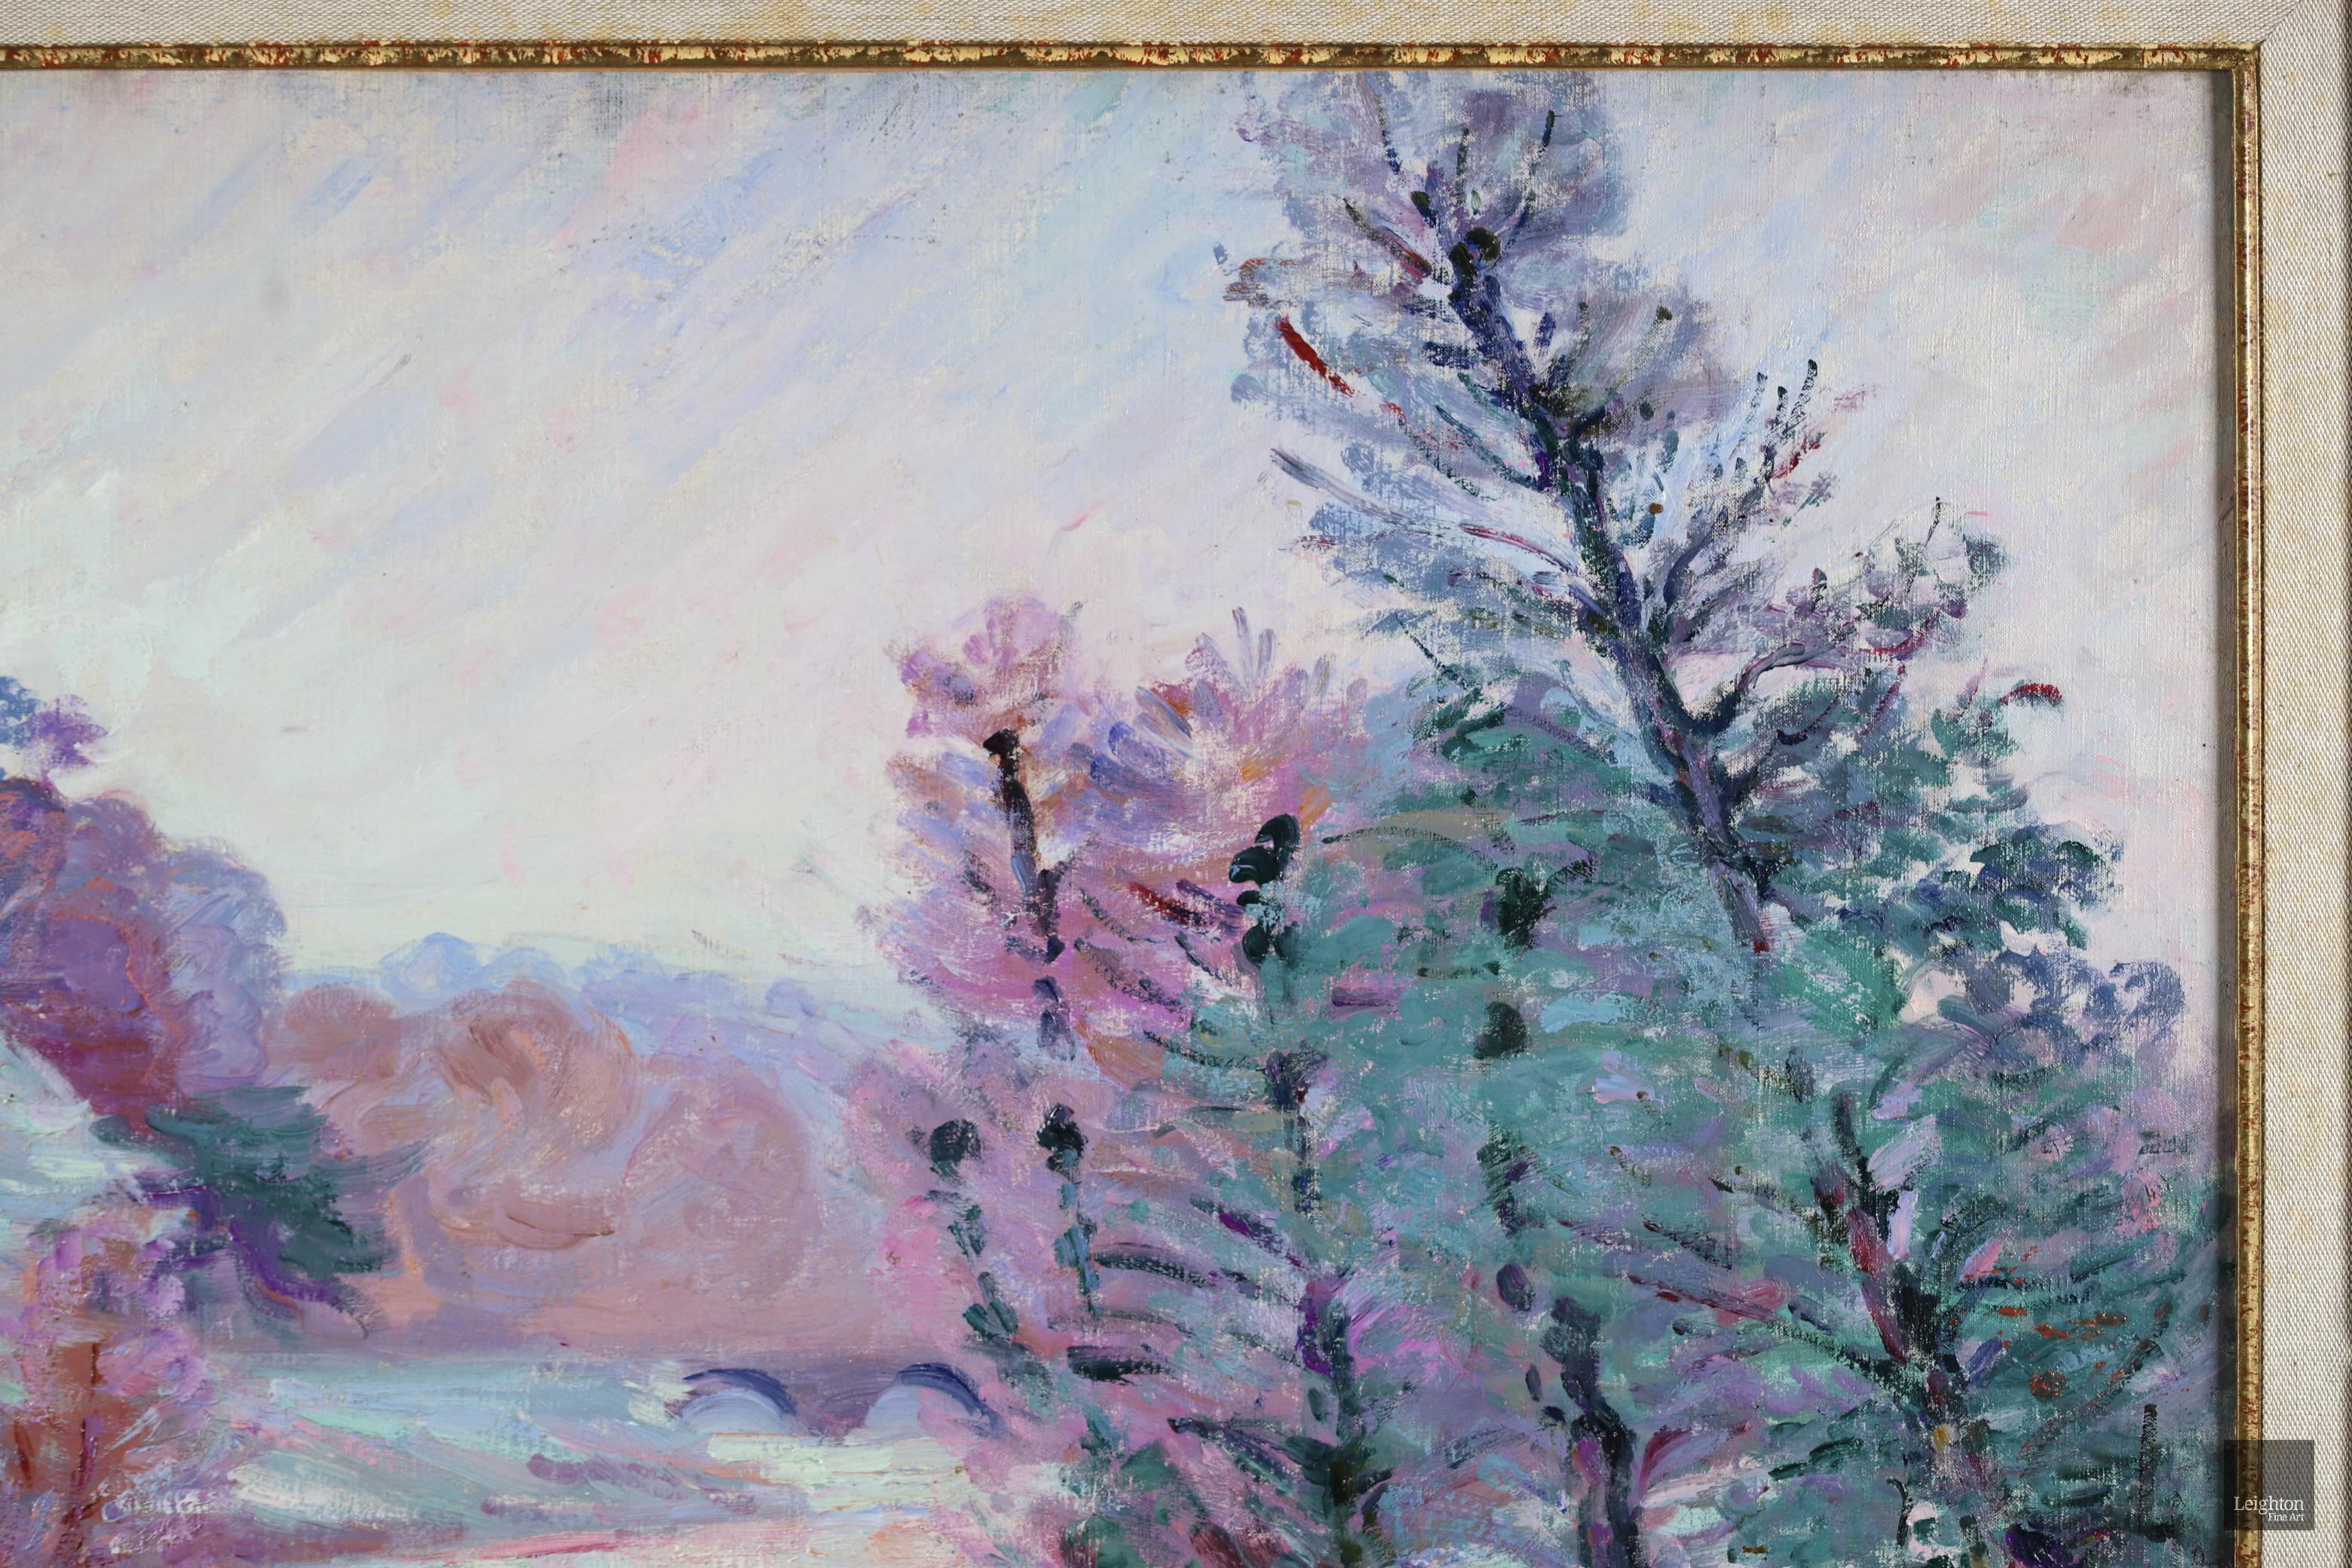 Soleil Blanche - Impressionist Snowy River Landscape Oil by Armand Guillaumin For Sale 3